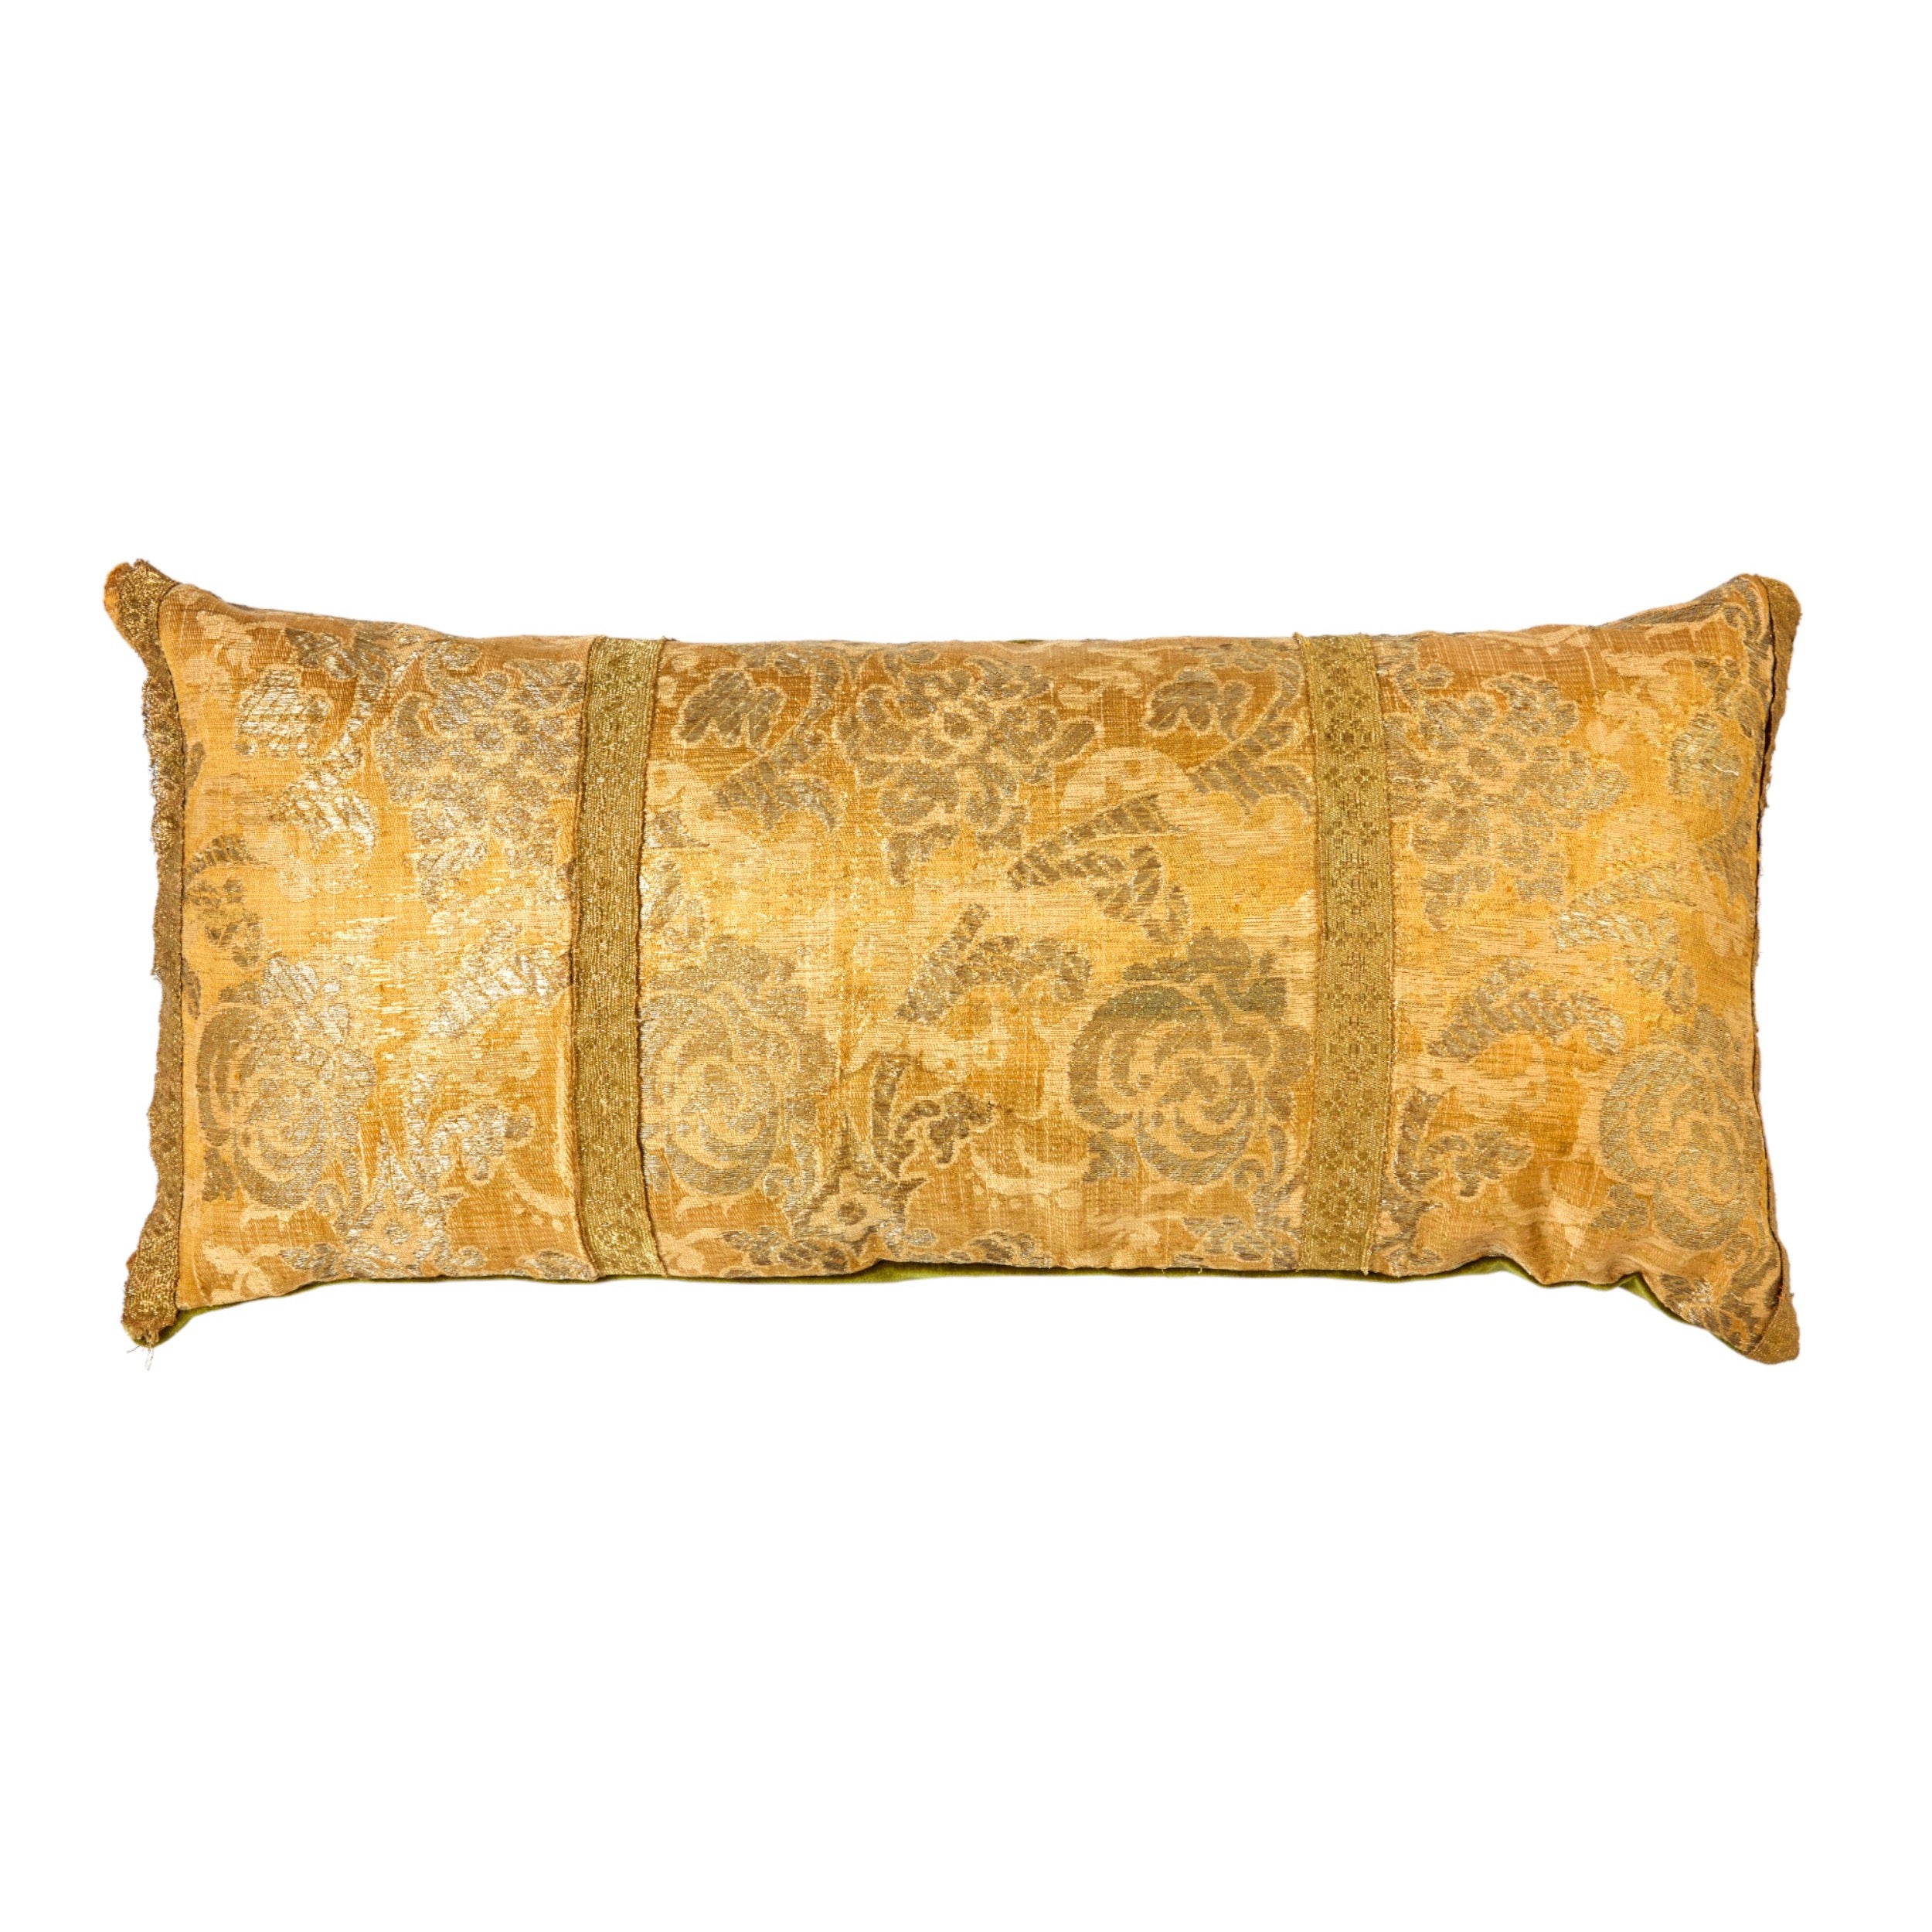 A Pair of Cushions made from Early 18th Century Gold Weave Brocade with their Original Braid